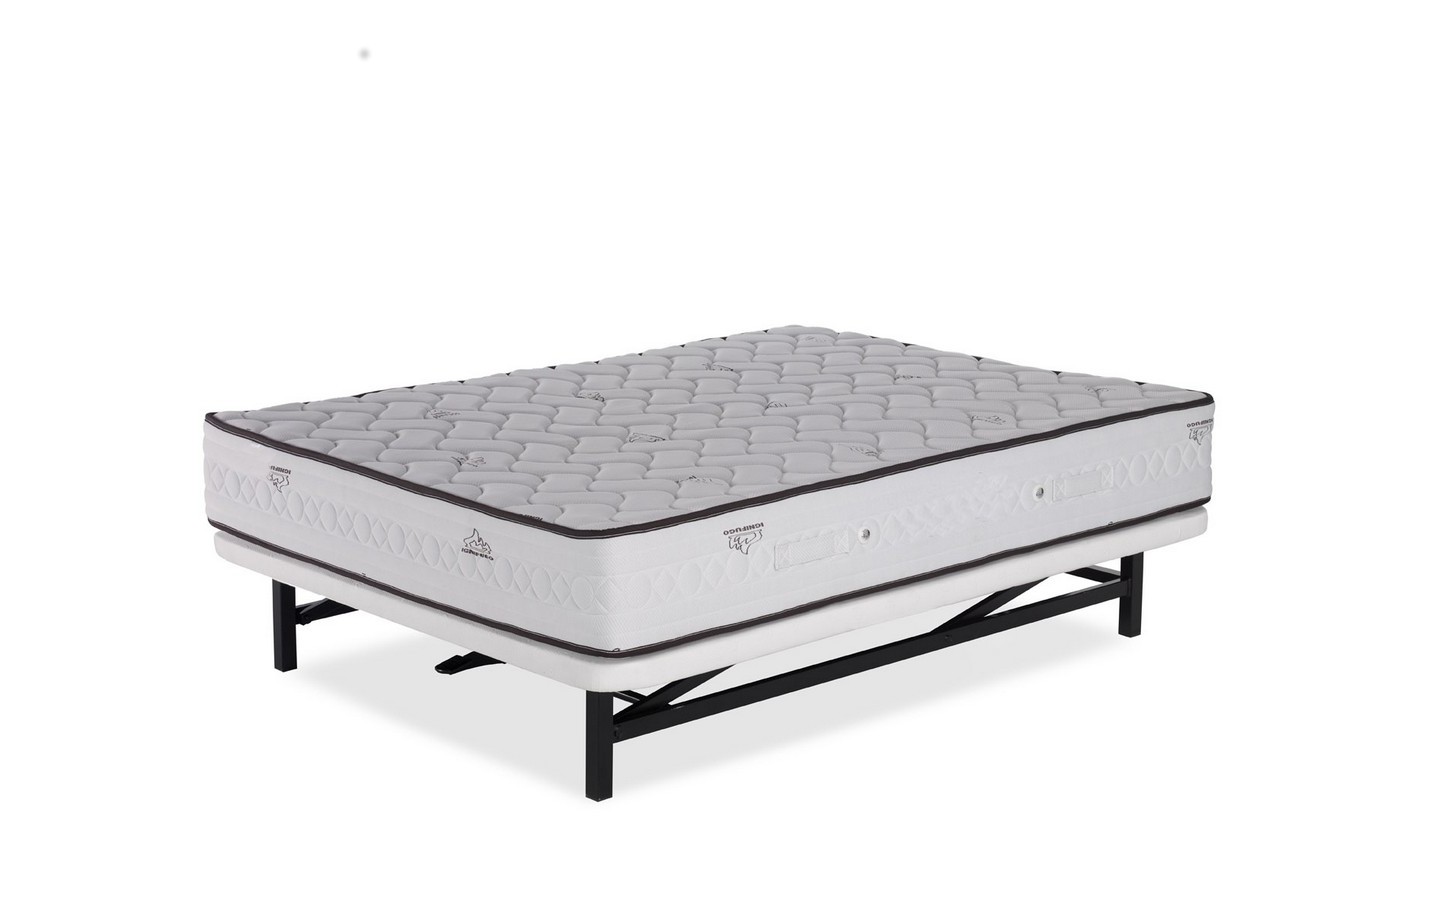 Bunk Beds For S Steel, Bunk Bed Mattress Combo